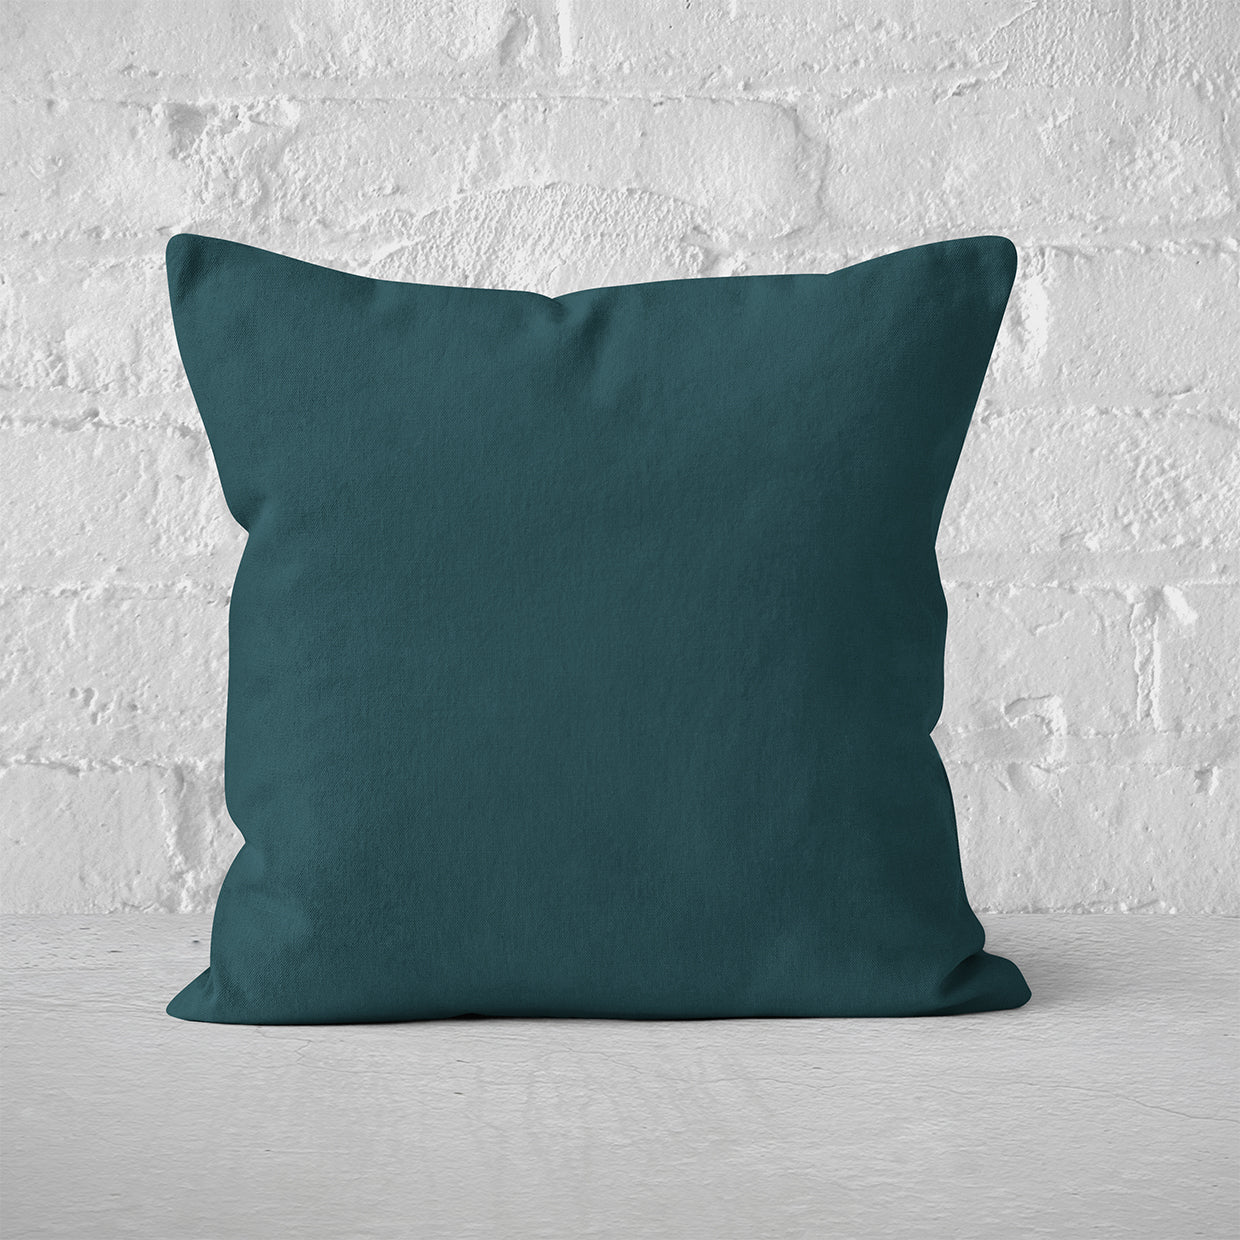 Pillow Cover Art Feature 'Solid' - Dark Green - Cotton Twill